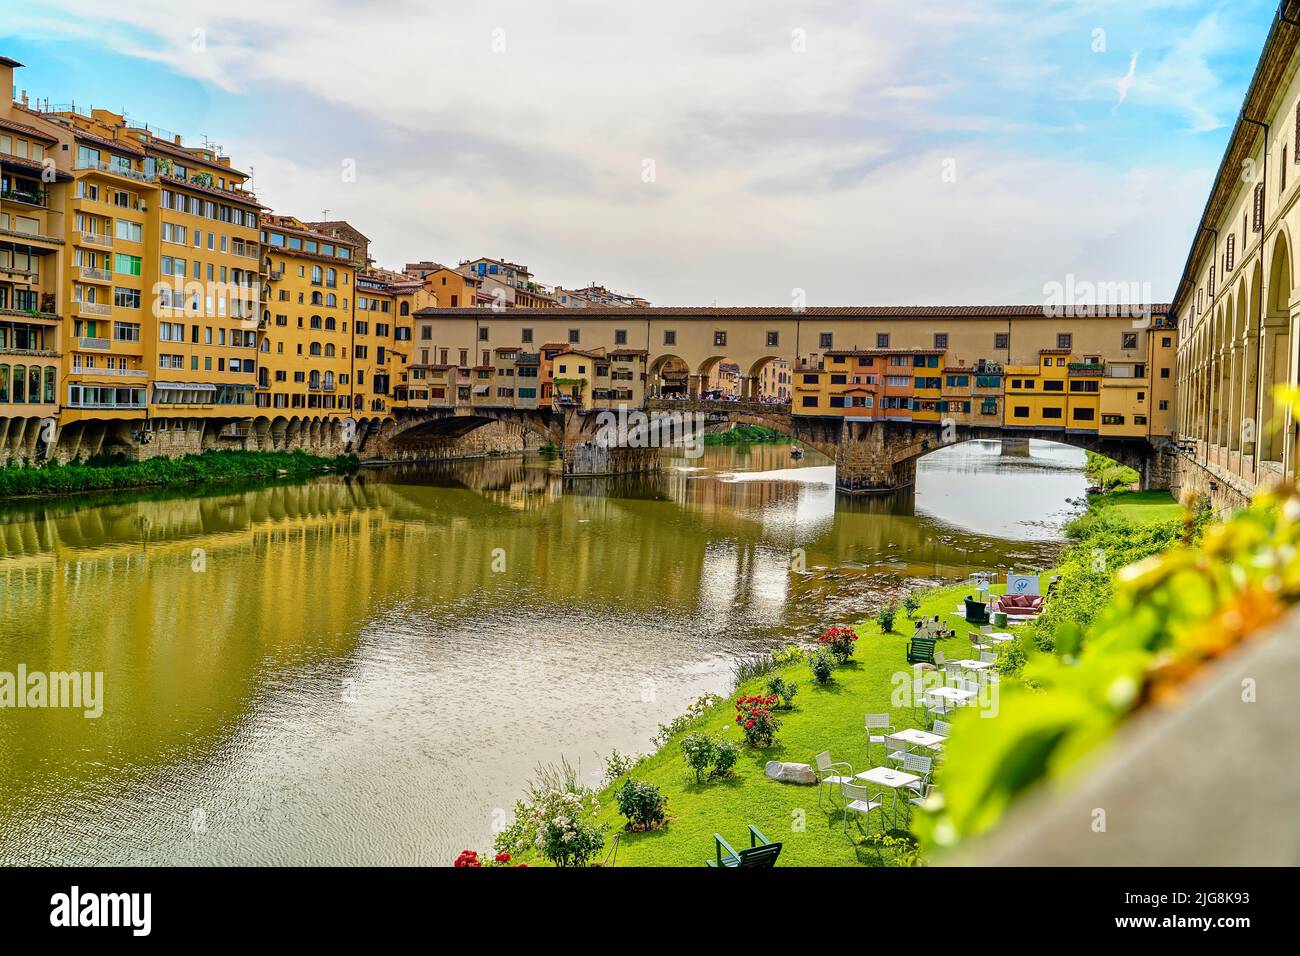 A beautiful view of Ponte Vecchio closed-spandrel arch bridge in Florence, Italy Stock Photo